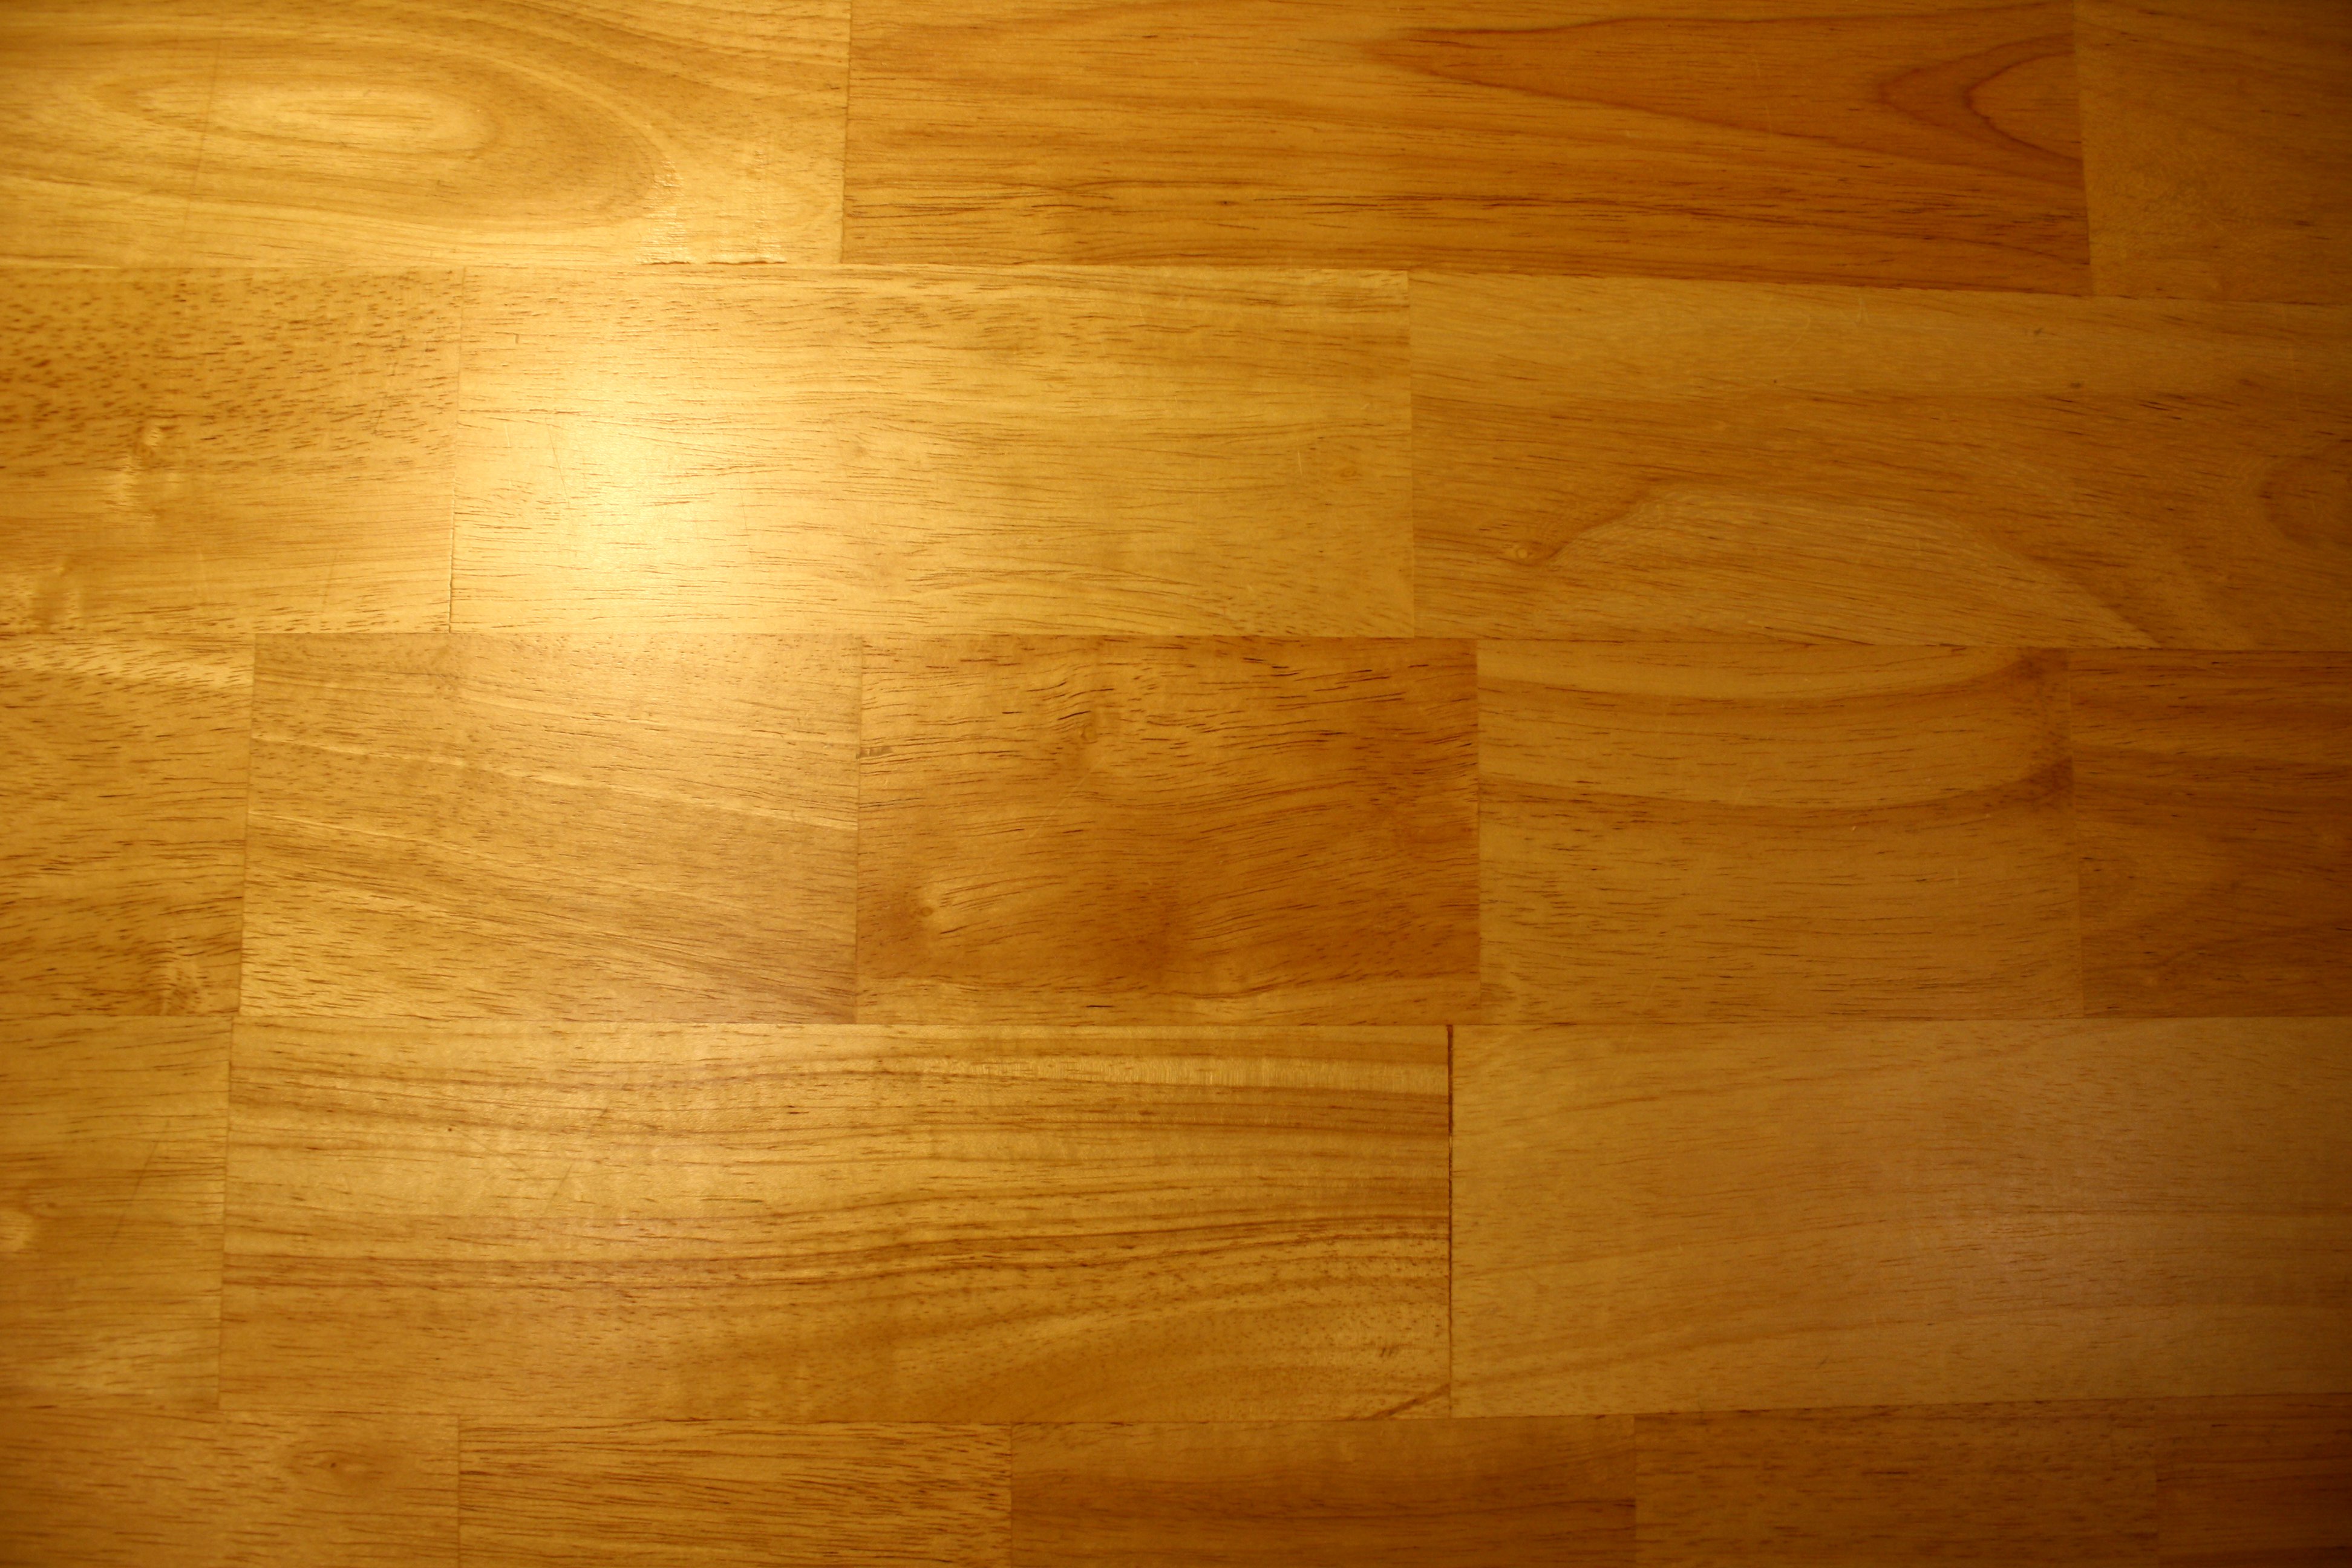  Wooden Floor Texture  Picture Free Photograph Photos 